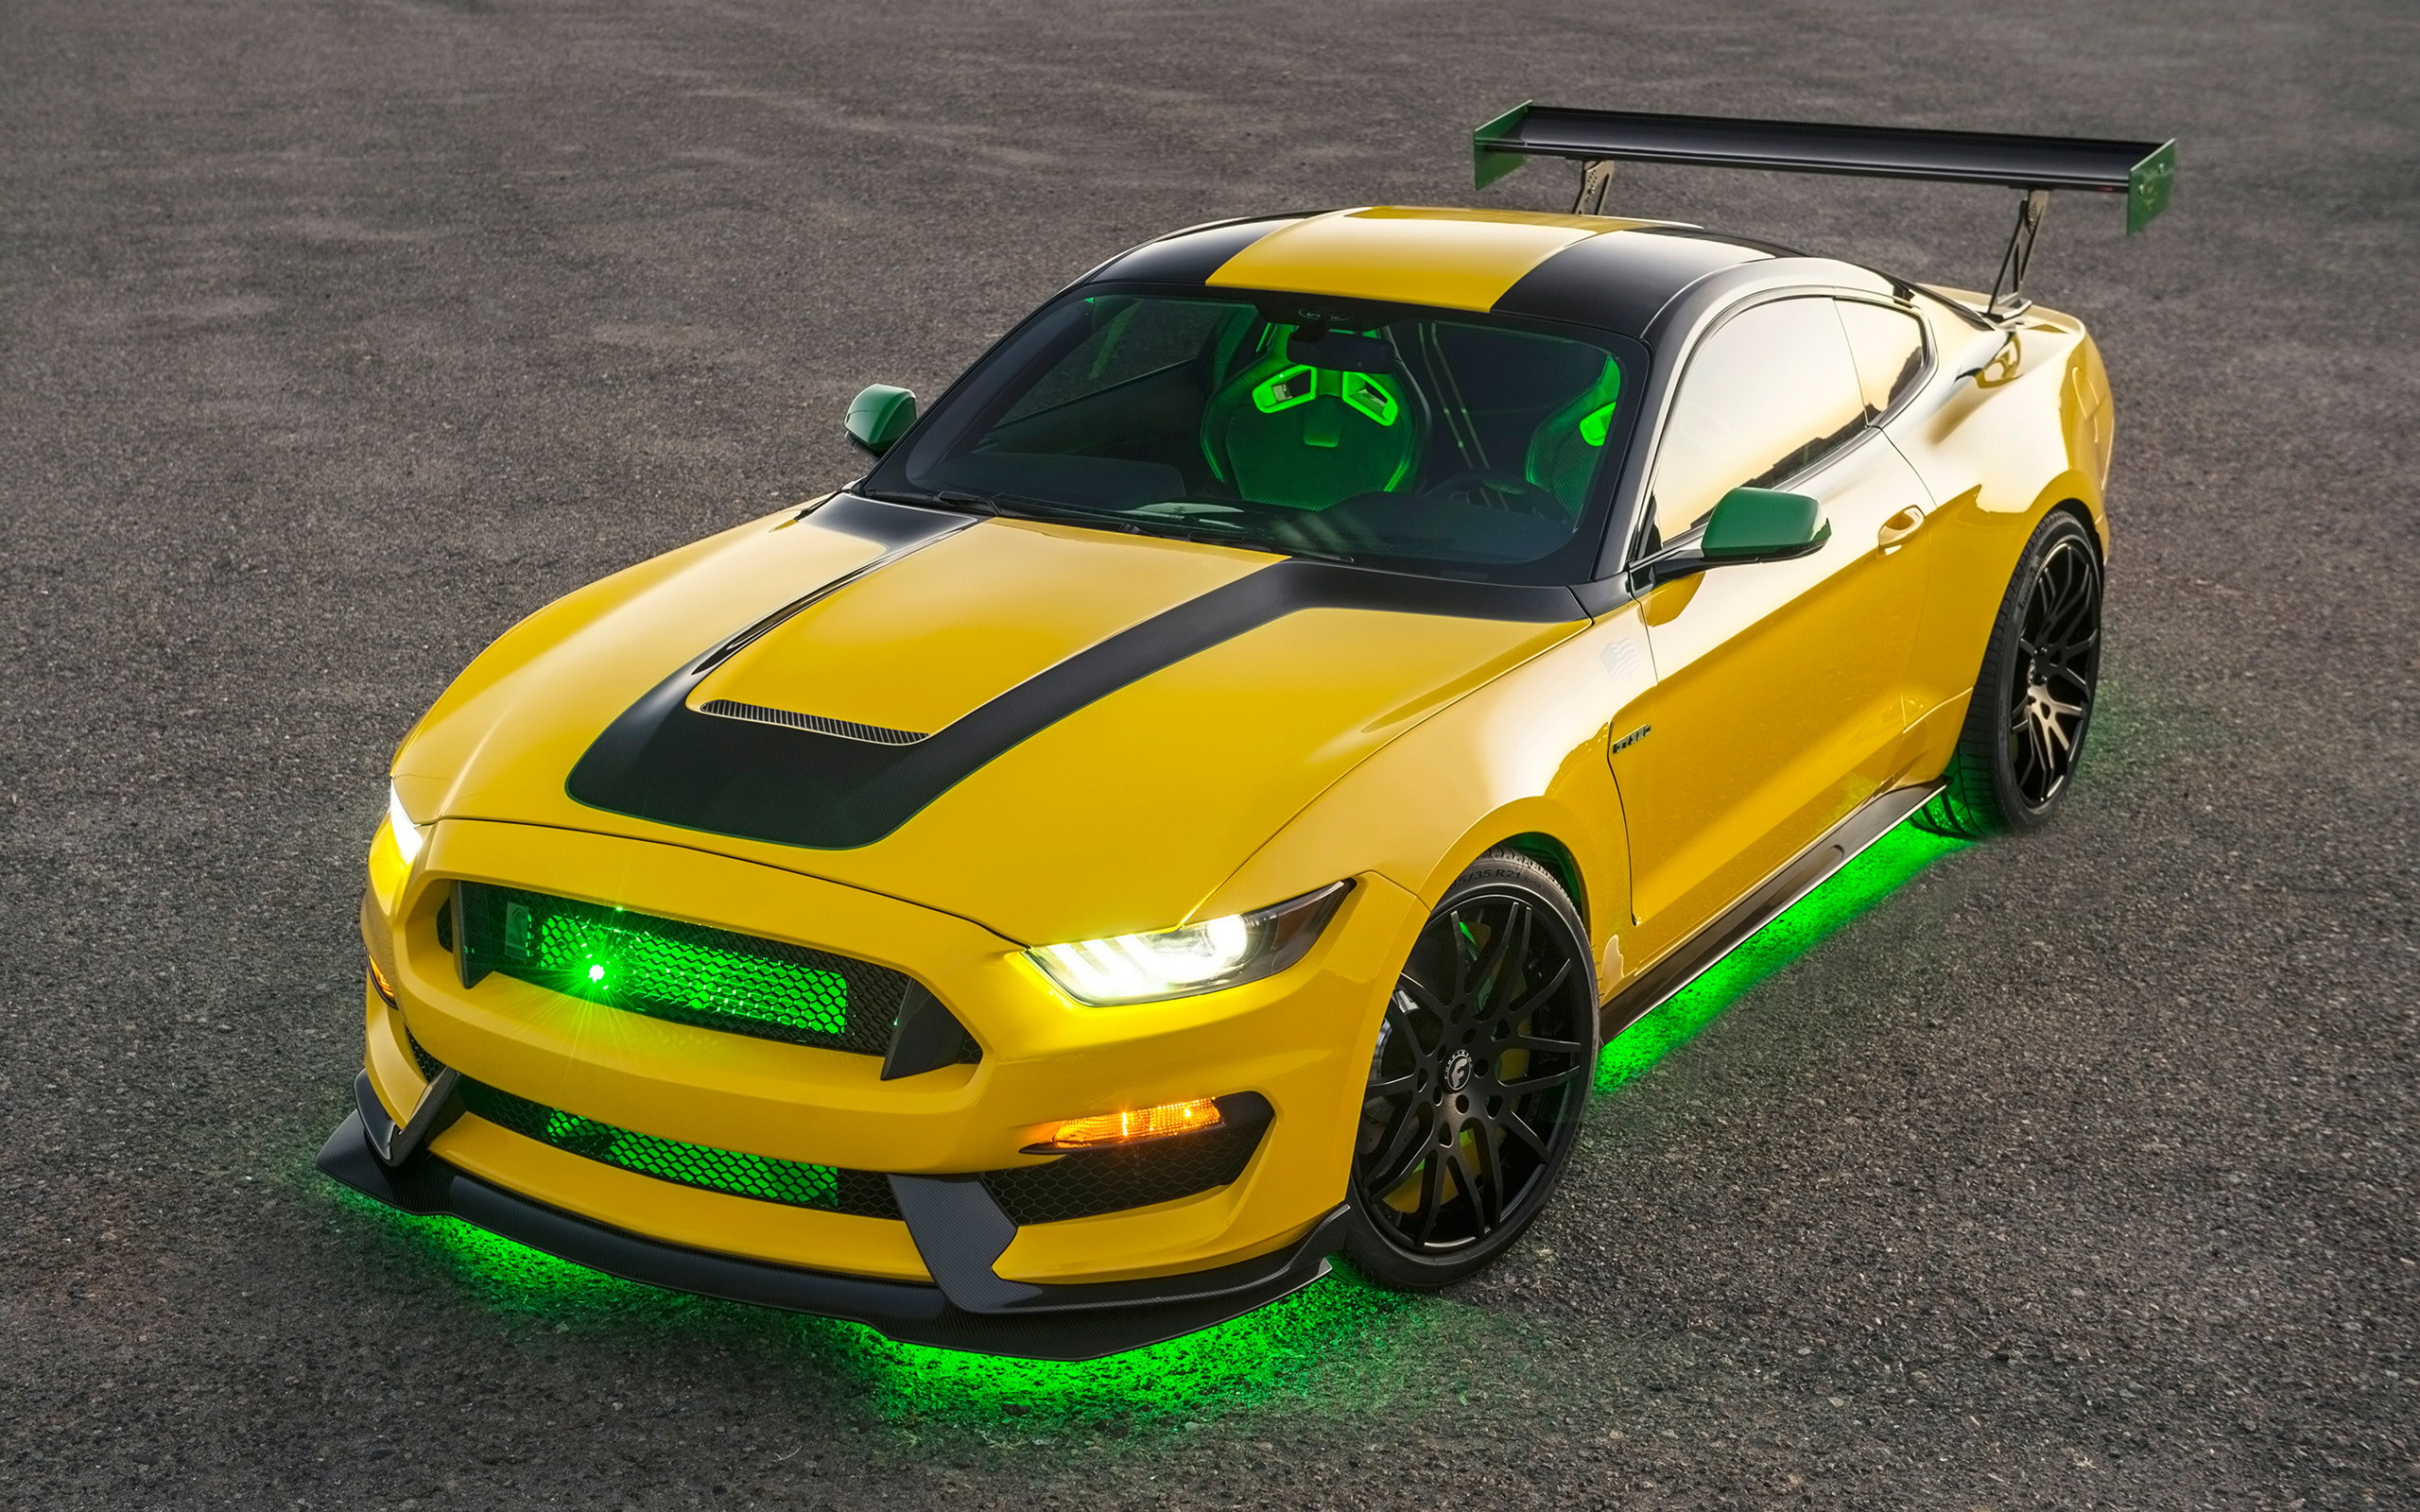 2016 Eaa Airventure Ford Shelby Gt350 Mustang Ole Yeller 2similar Car Wallpapers Wallpaper Cars Wallpaper Better